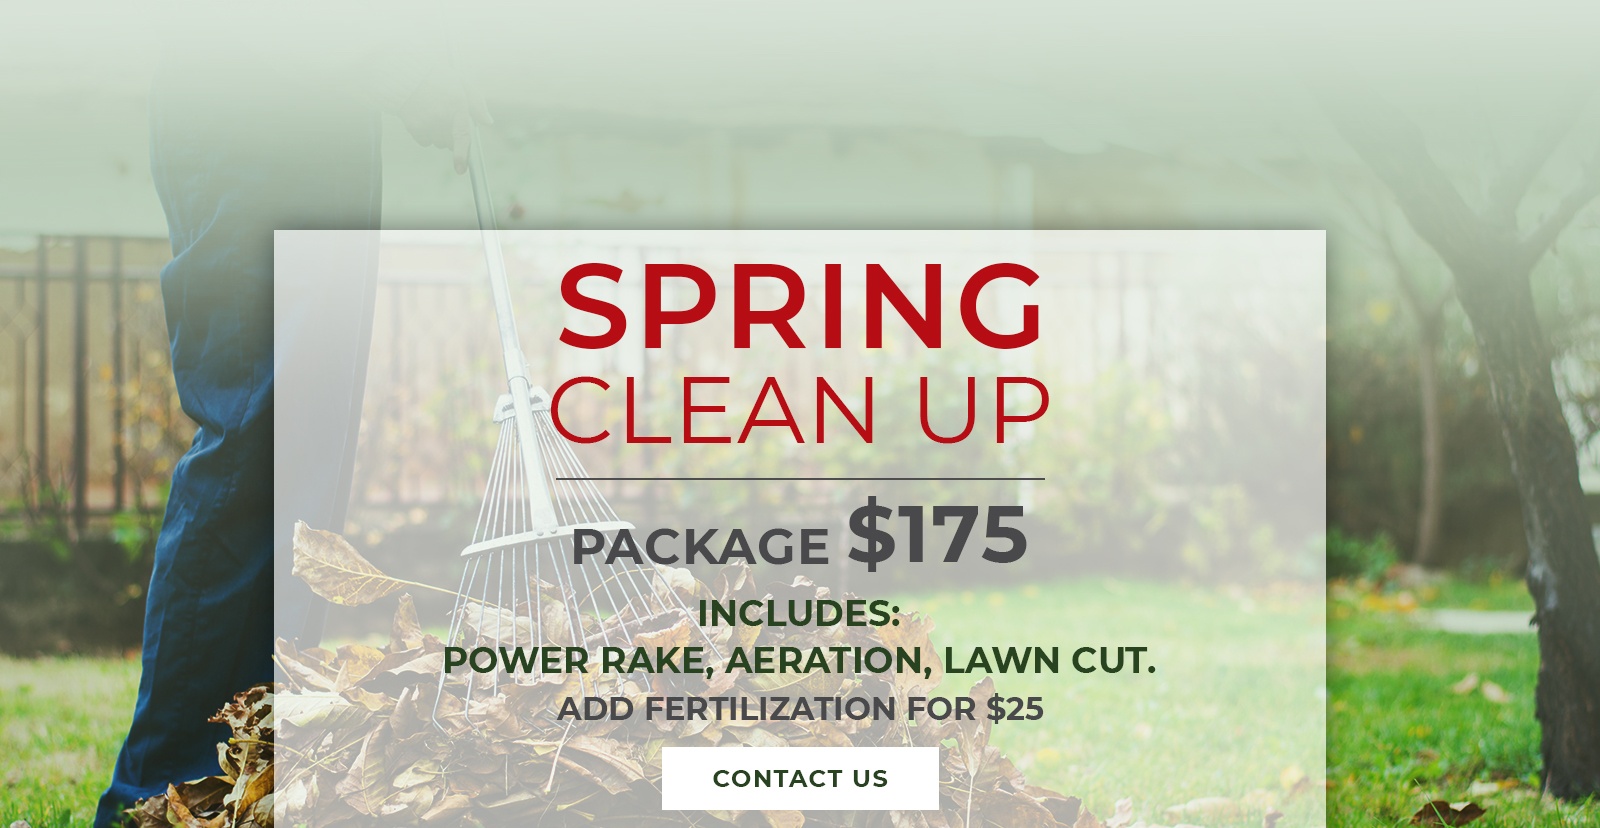 Affordable Lawn Care Calgary